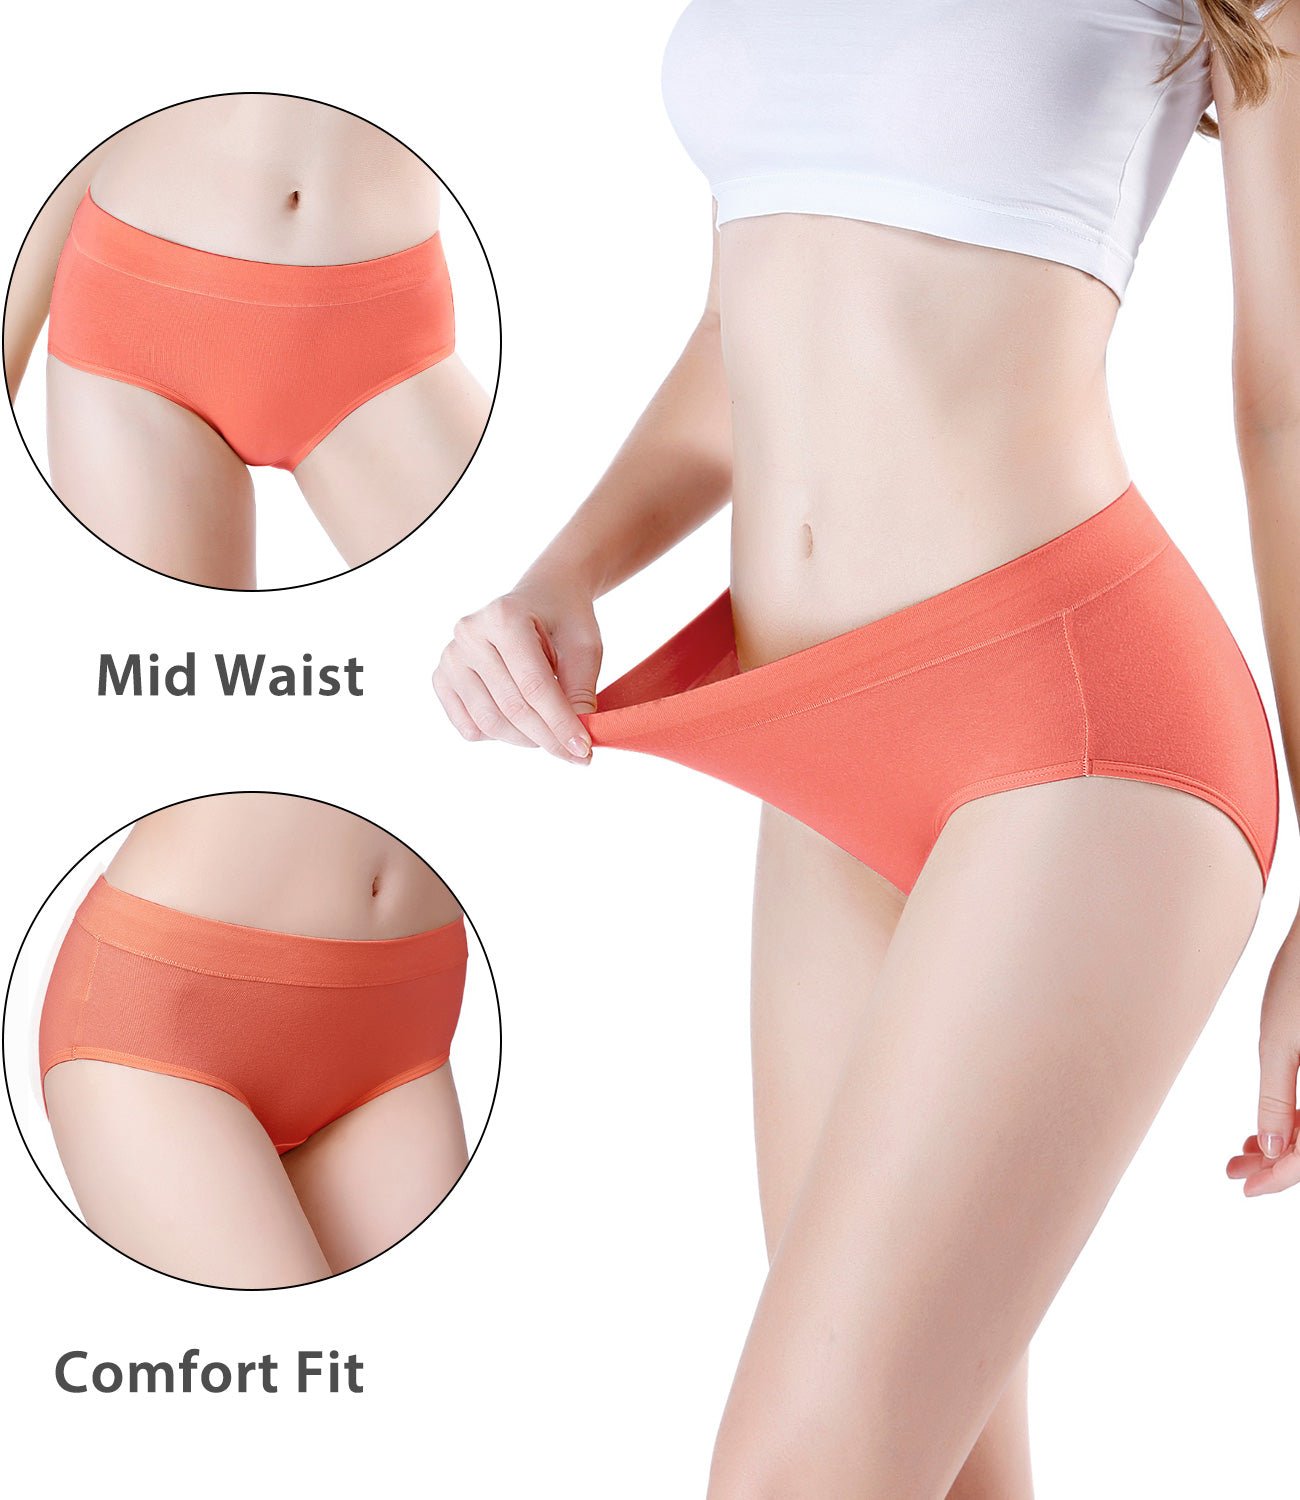 wirarpa Women's Cotton Stretch Underwear Comfy Mid Waisted Briefs Ladies  Breathable Panties Multipack Size 5-10